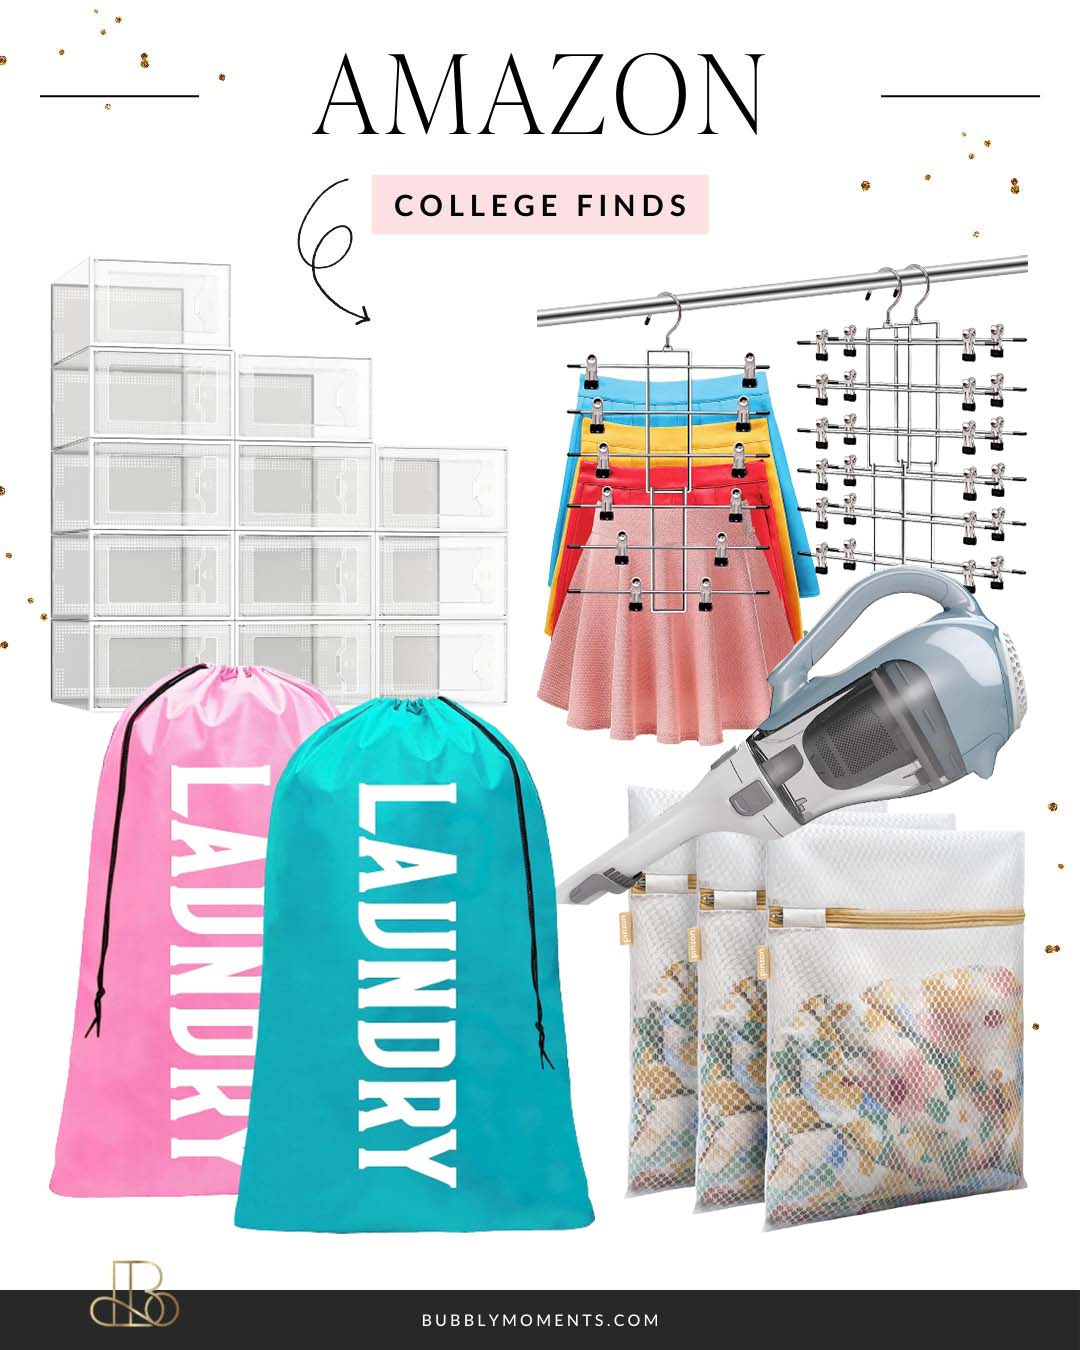 Sweater and Lingerie Wash Bag - Is a dorm room supplies essential for  laundry college dorm room products dorm supplies dorm stuff